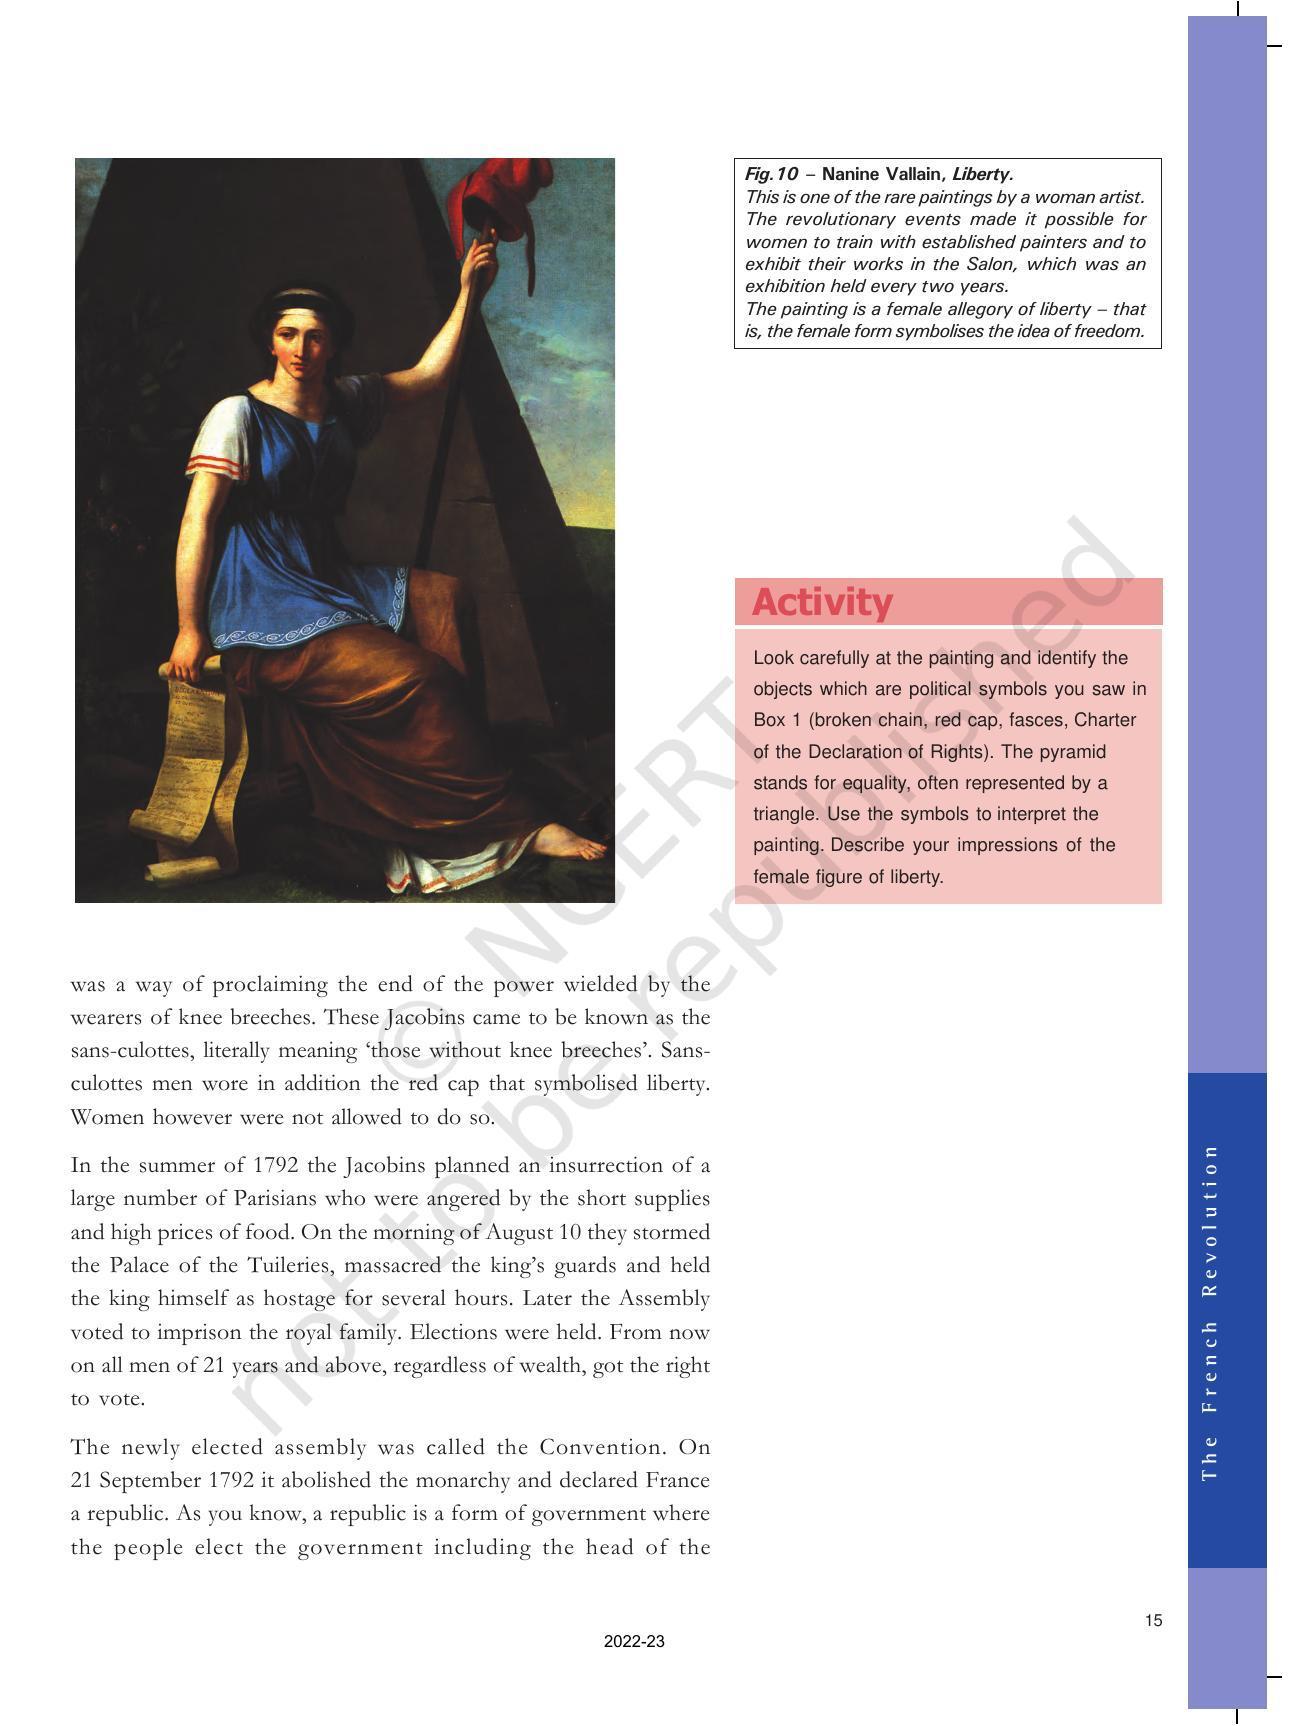 NCERT Book for Class 9 History Chapter 1 The French Revolution - Page 15